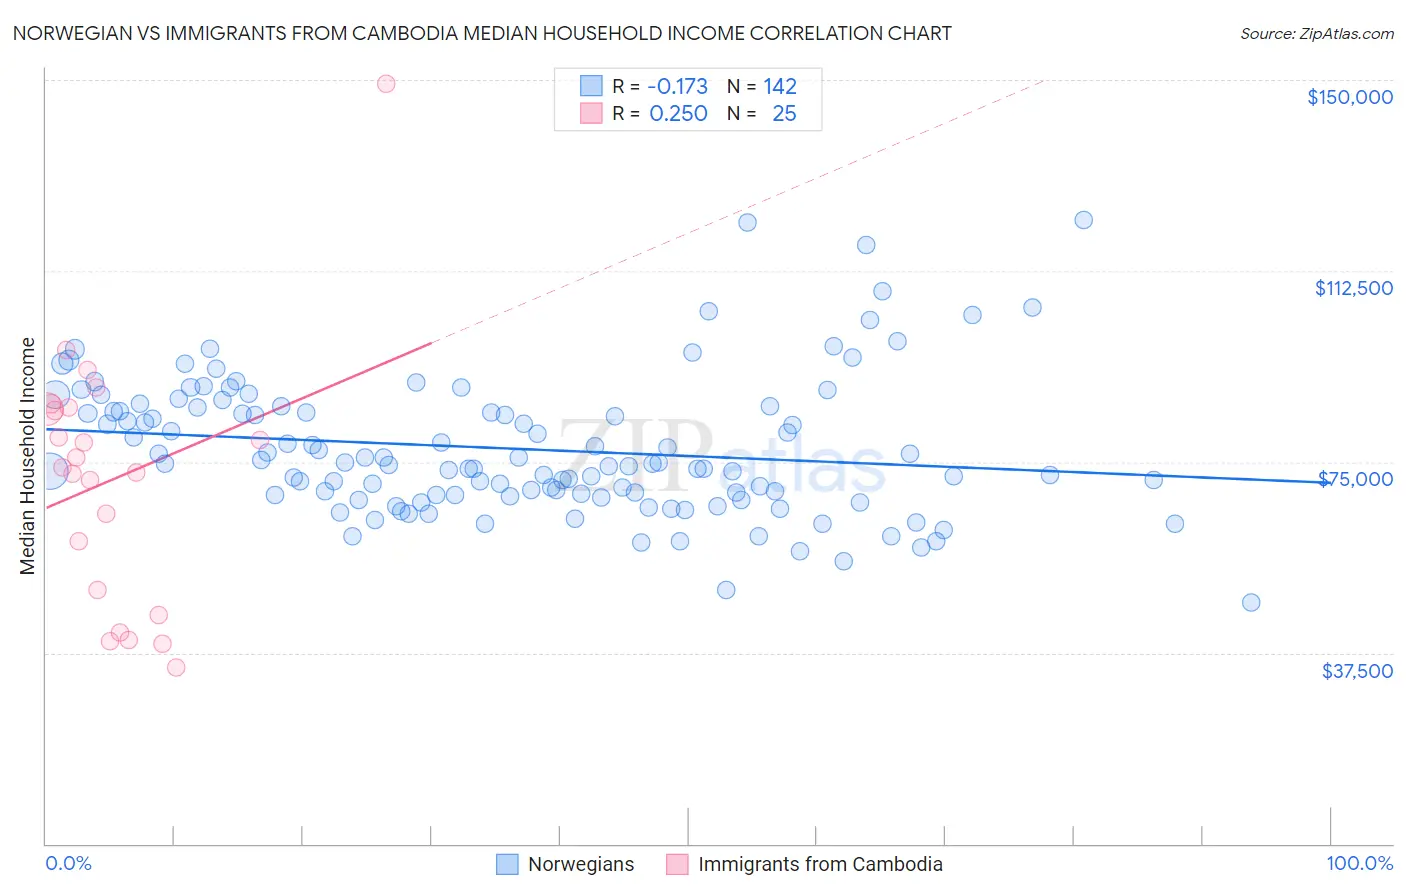 Norwegian vs Immigrants from Cambodia Median Household Income